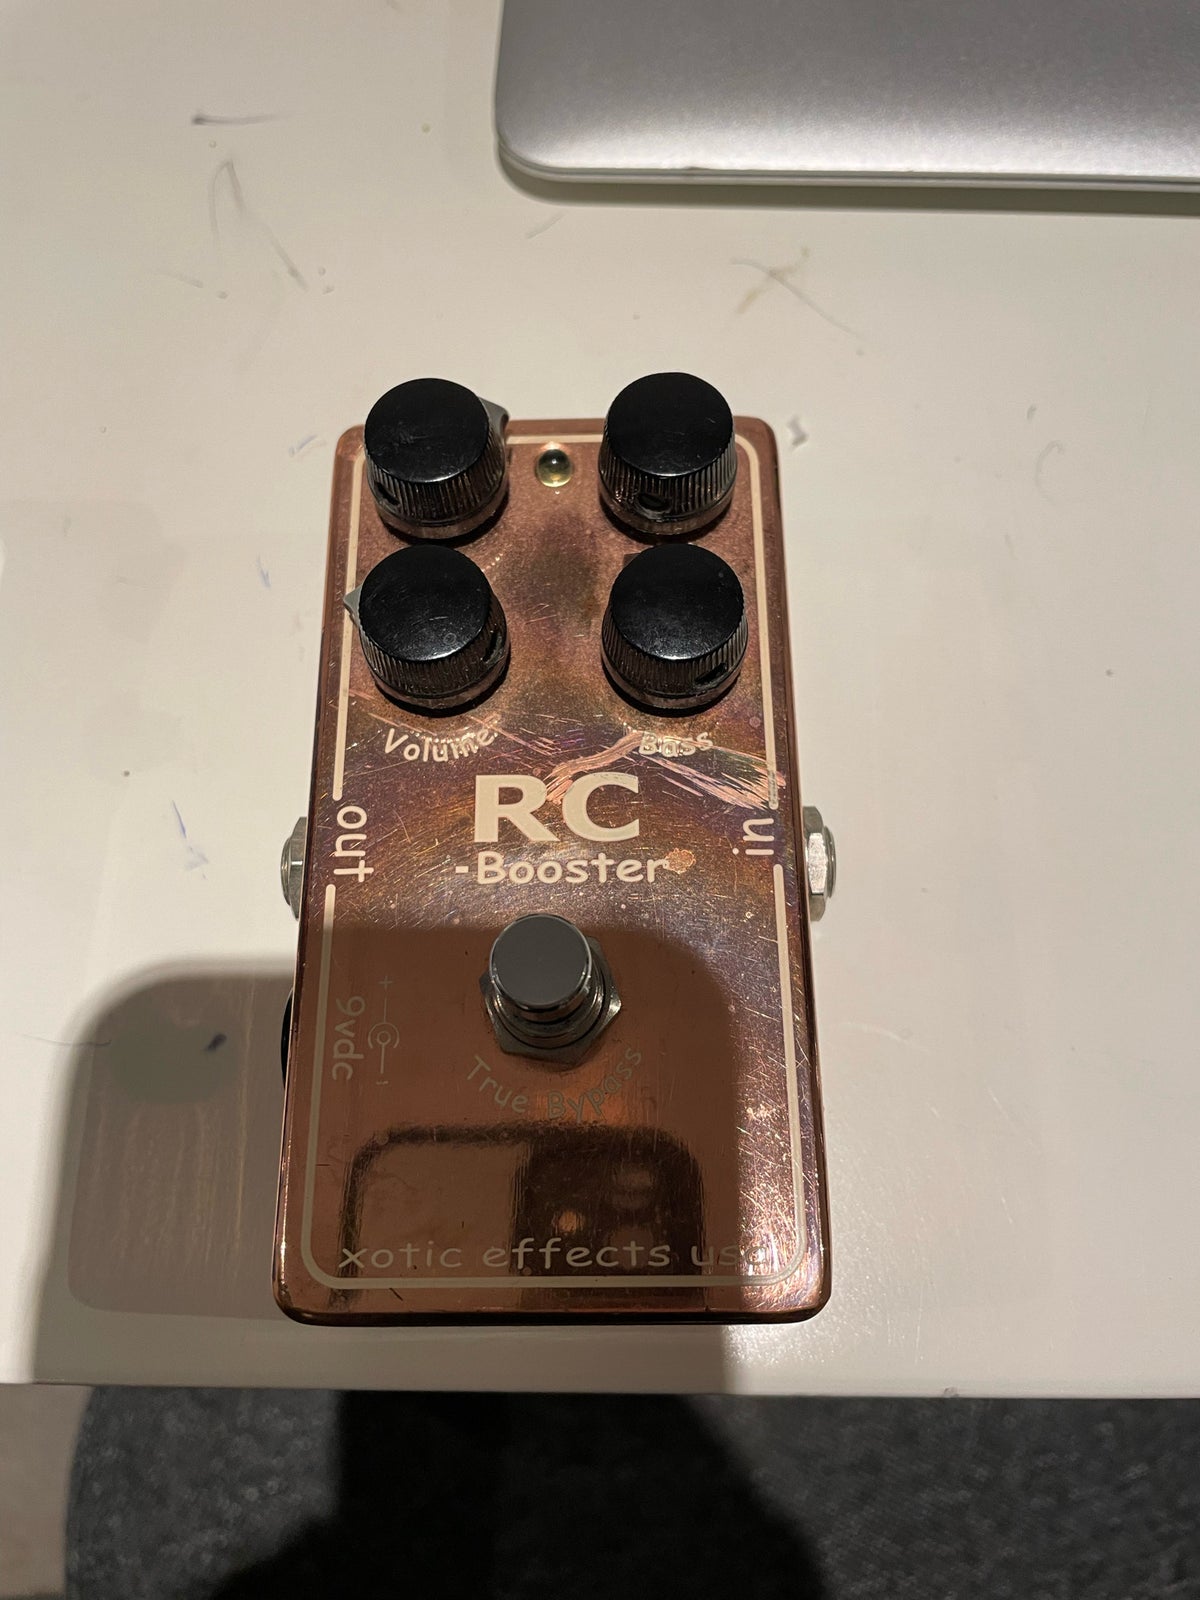 Xotic RC booster, Xotic Effects